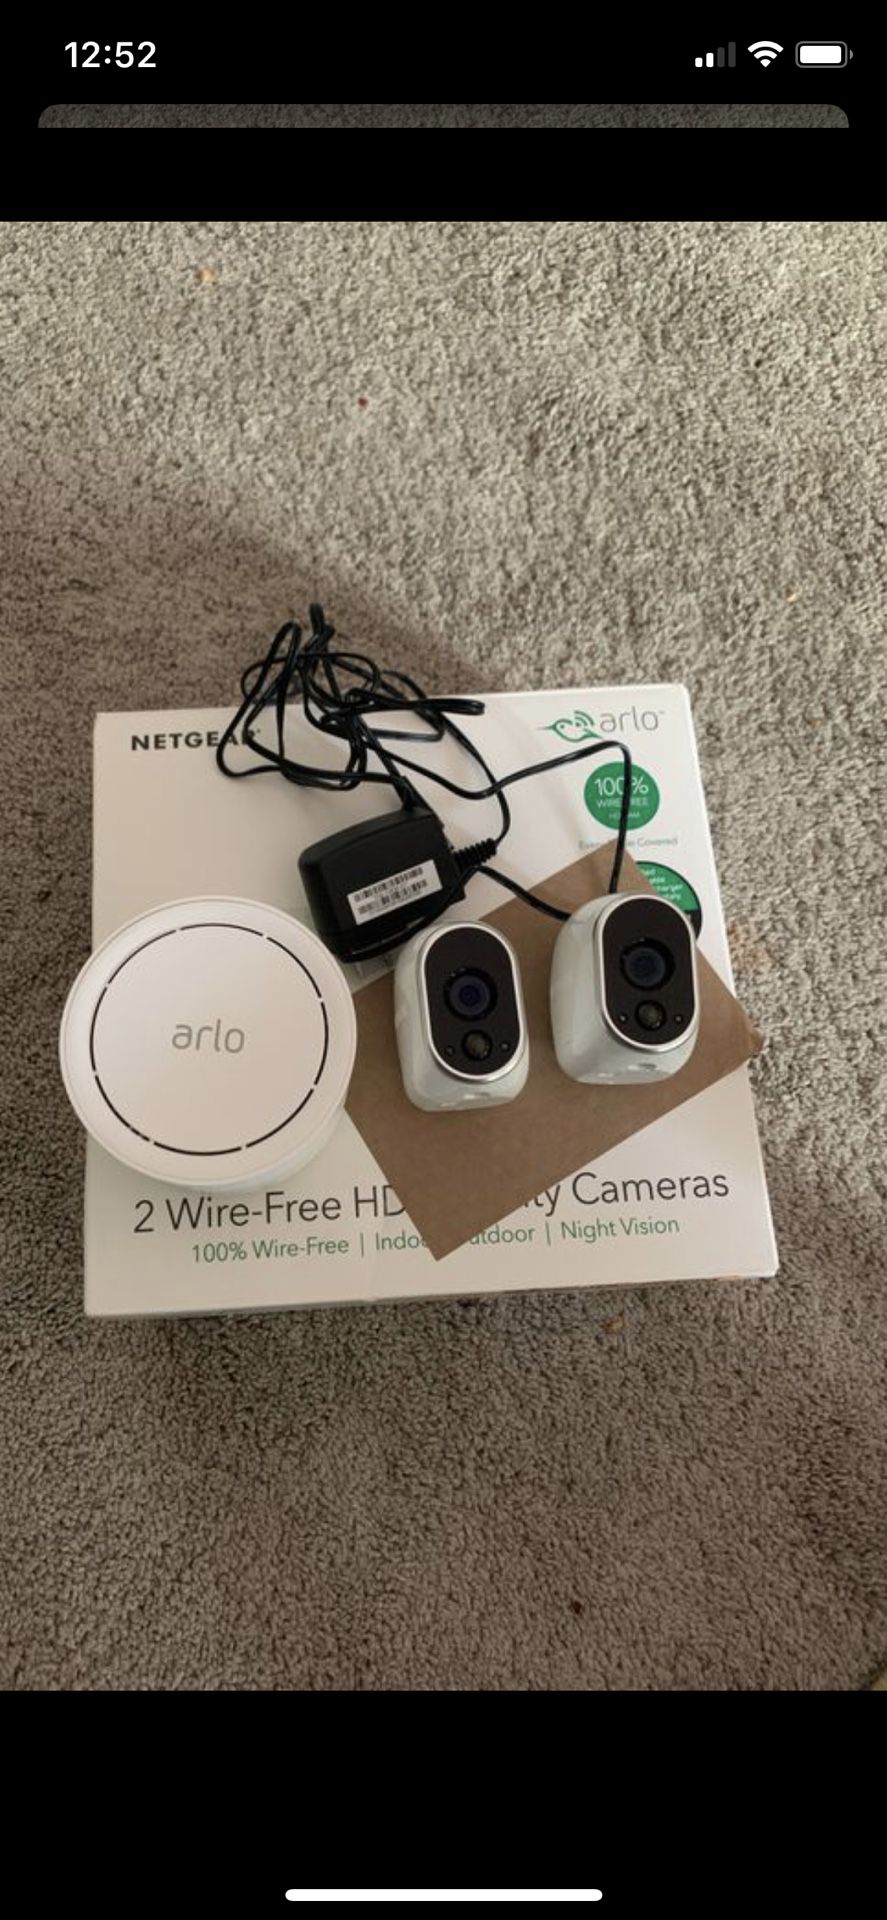 Arlo 2 wire free security camera for indoor and outdoor